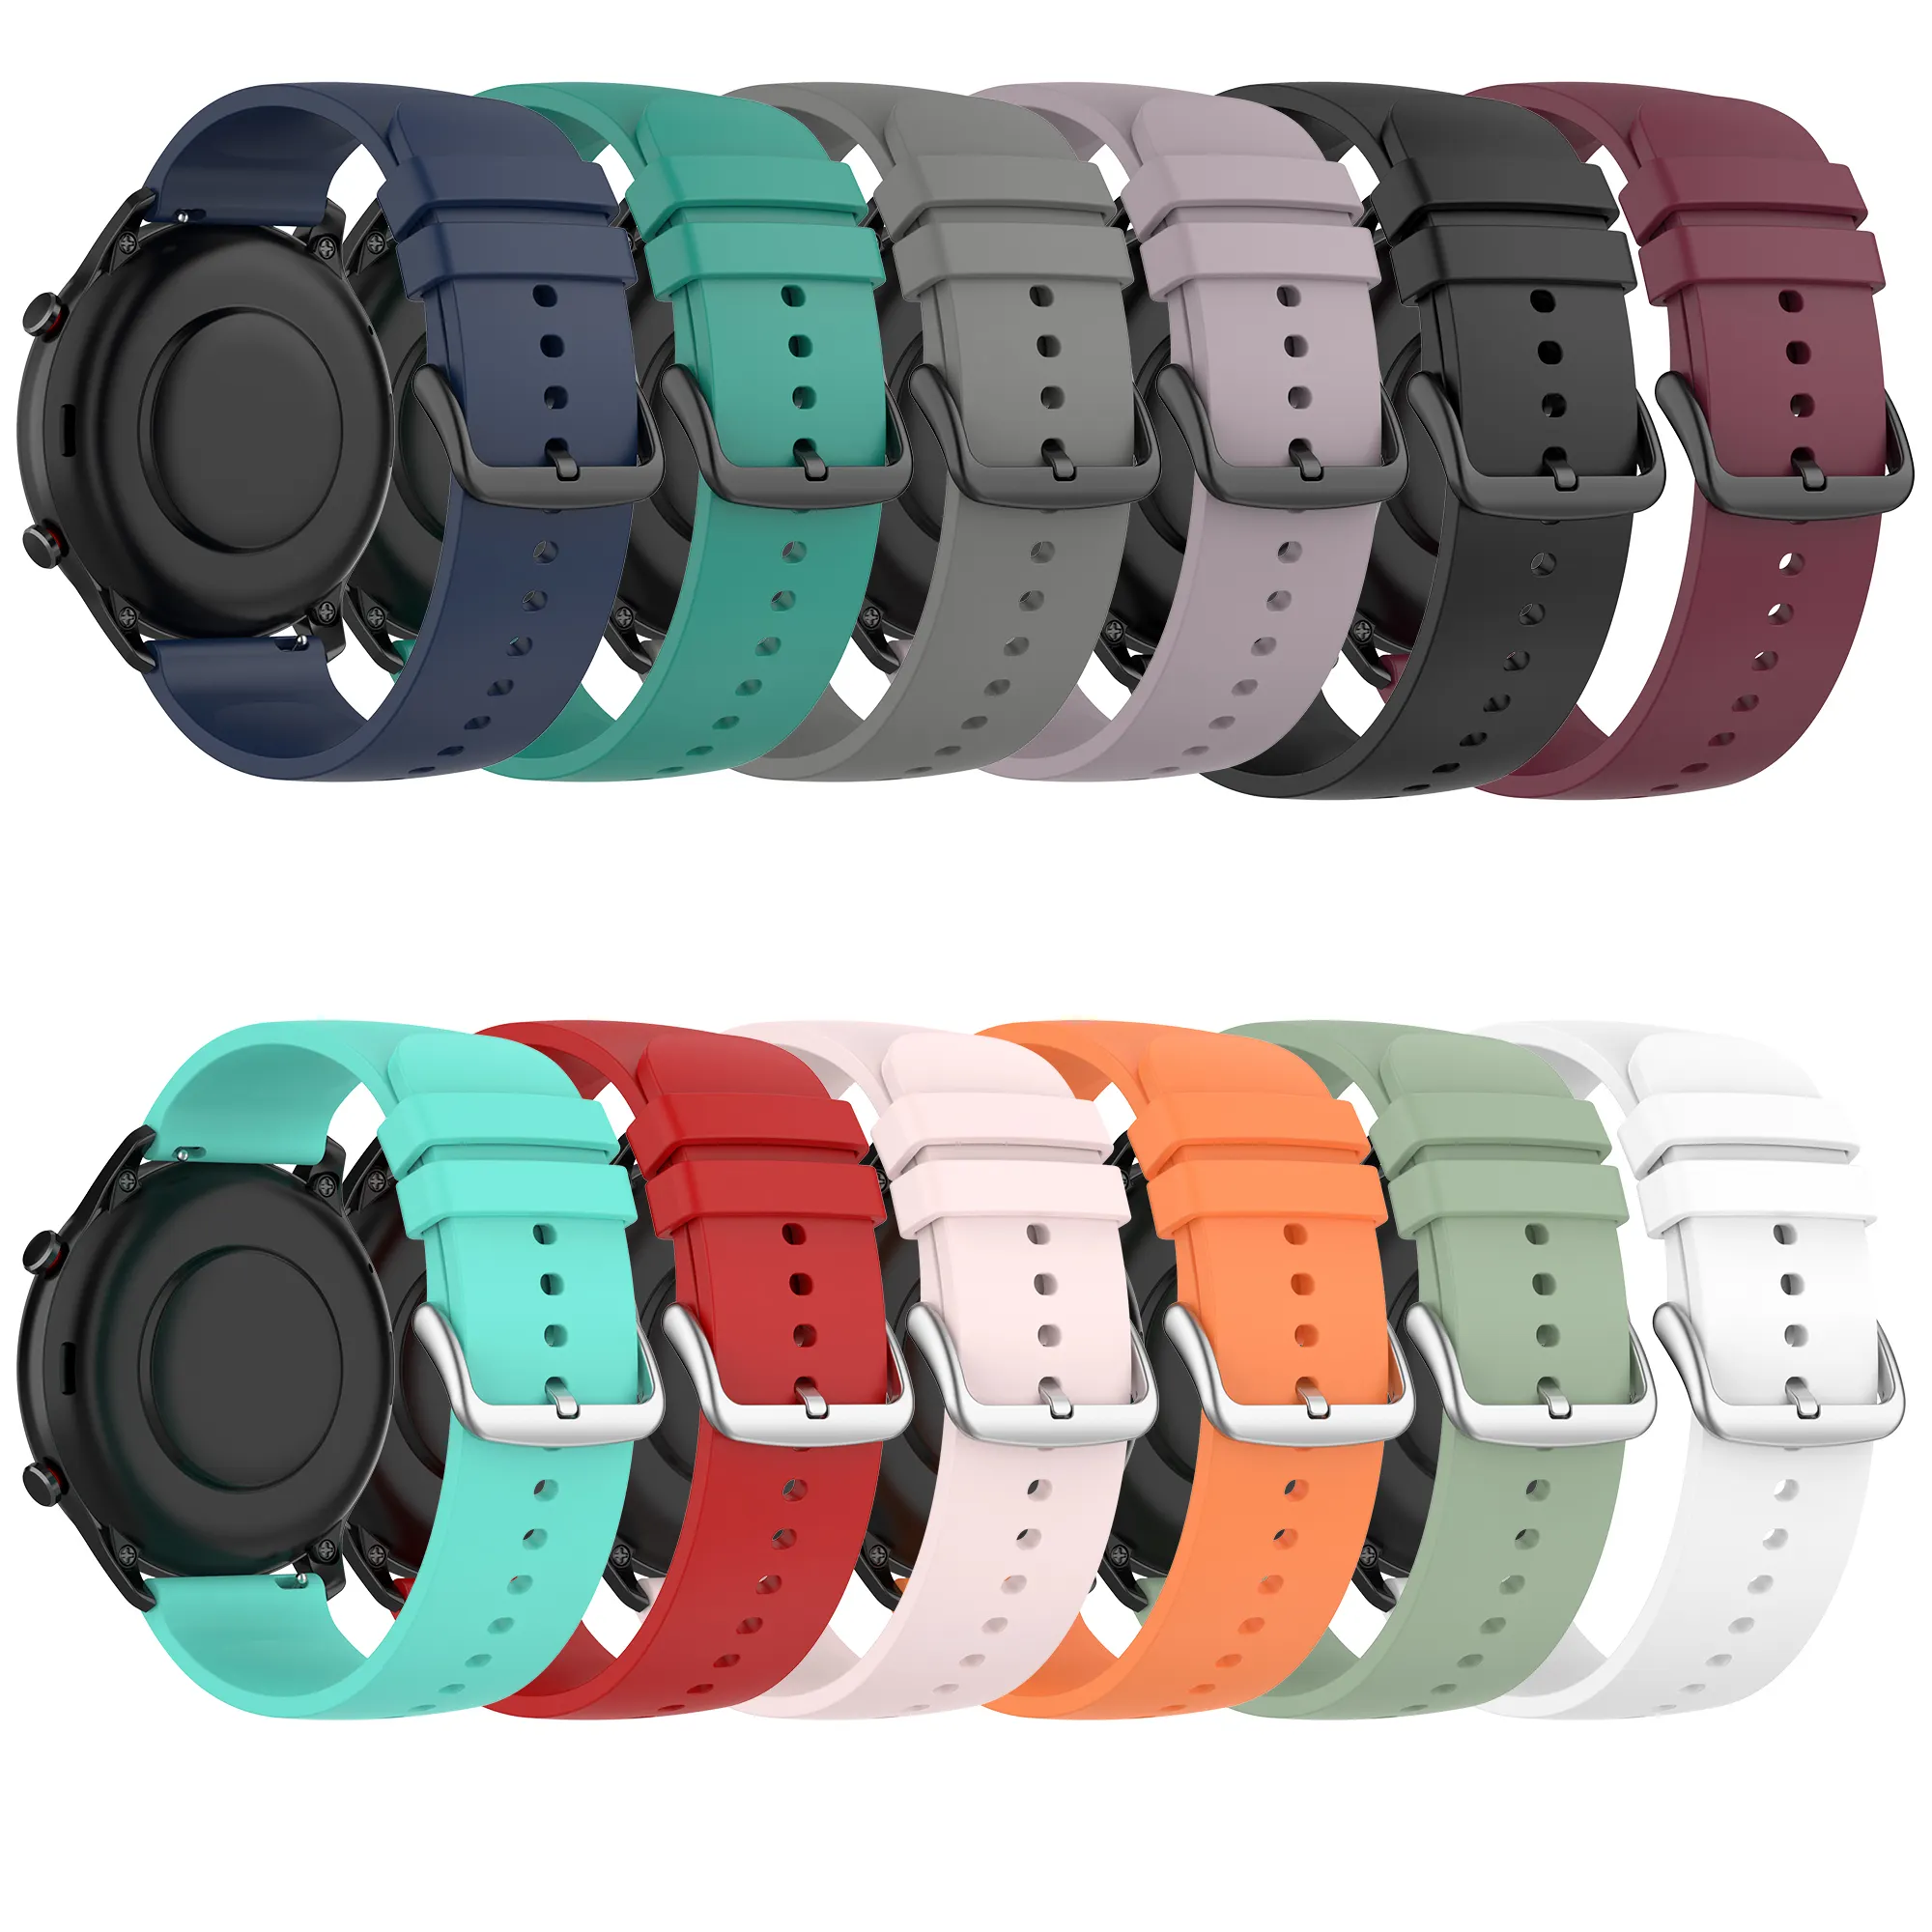 22mm Sports Silicone bands for Huami Amazfit PACE Stratos 3 2/2S GTR 47mm Smart Watch Replacement Smart band